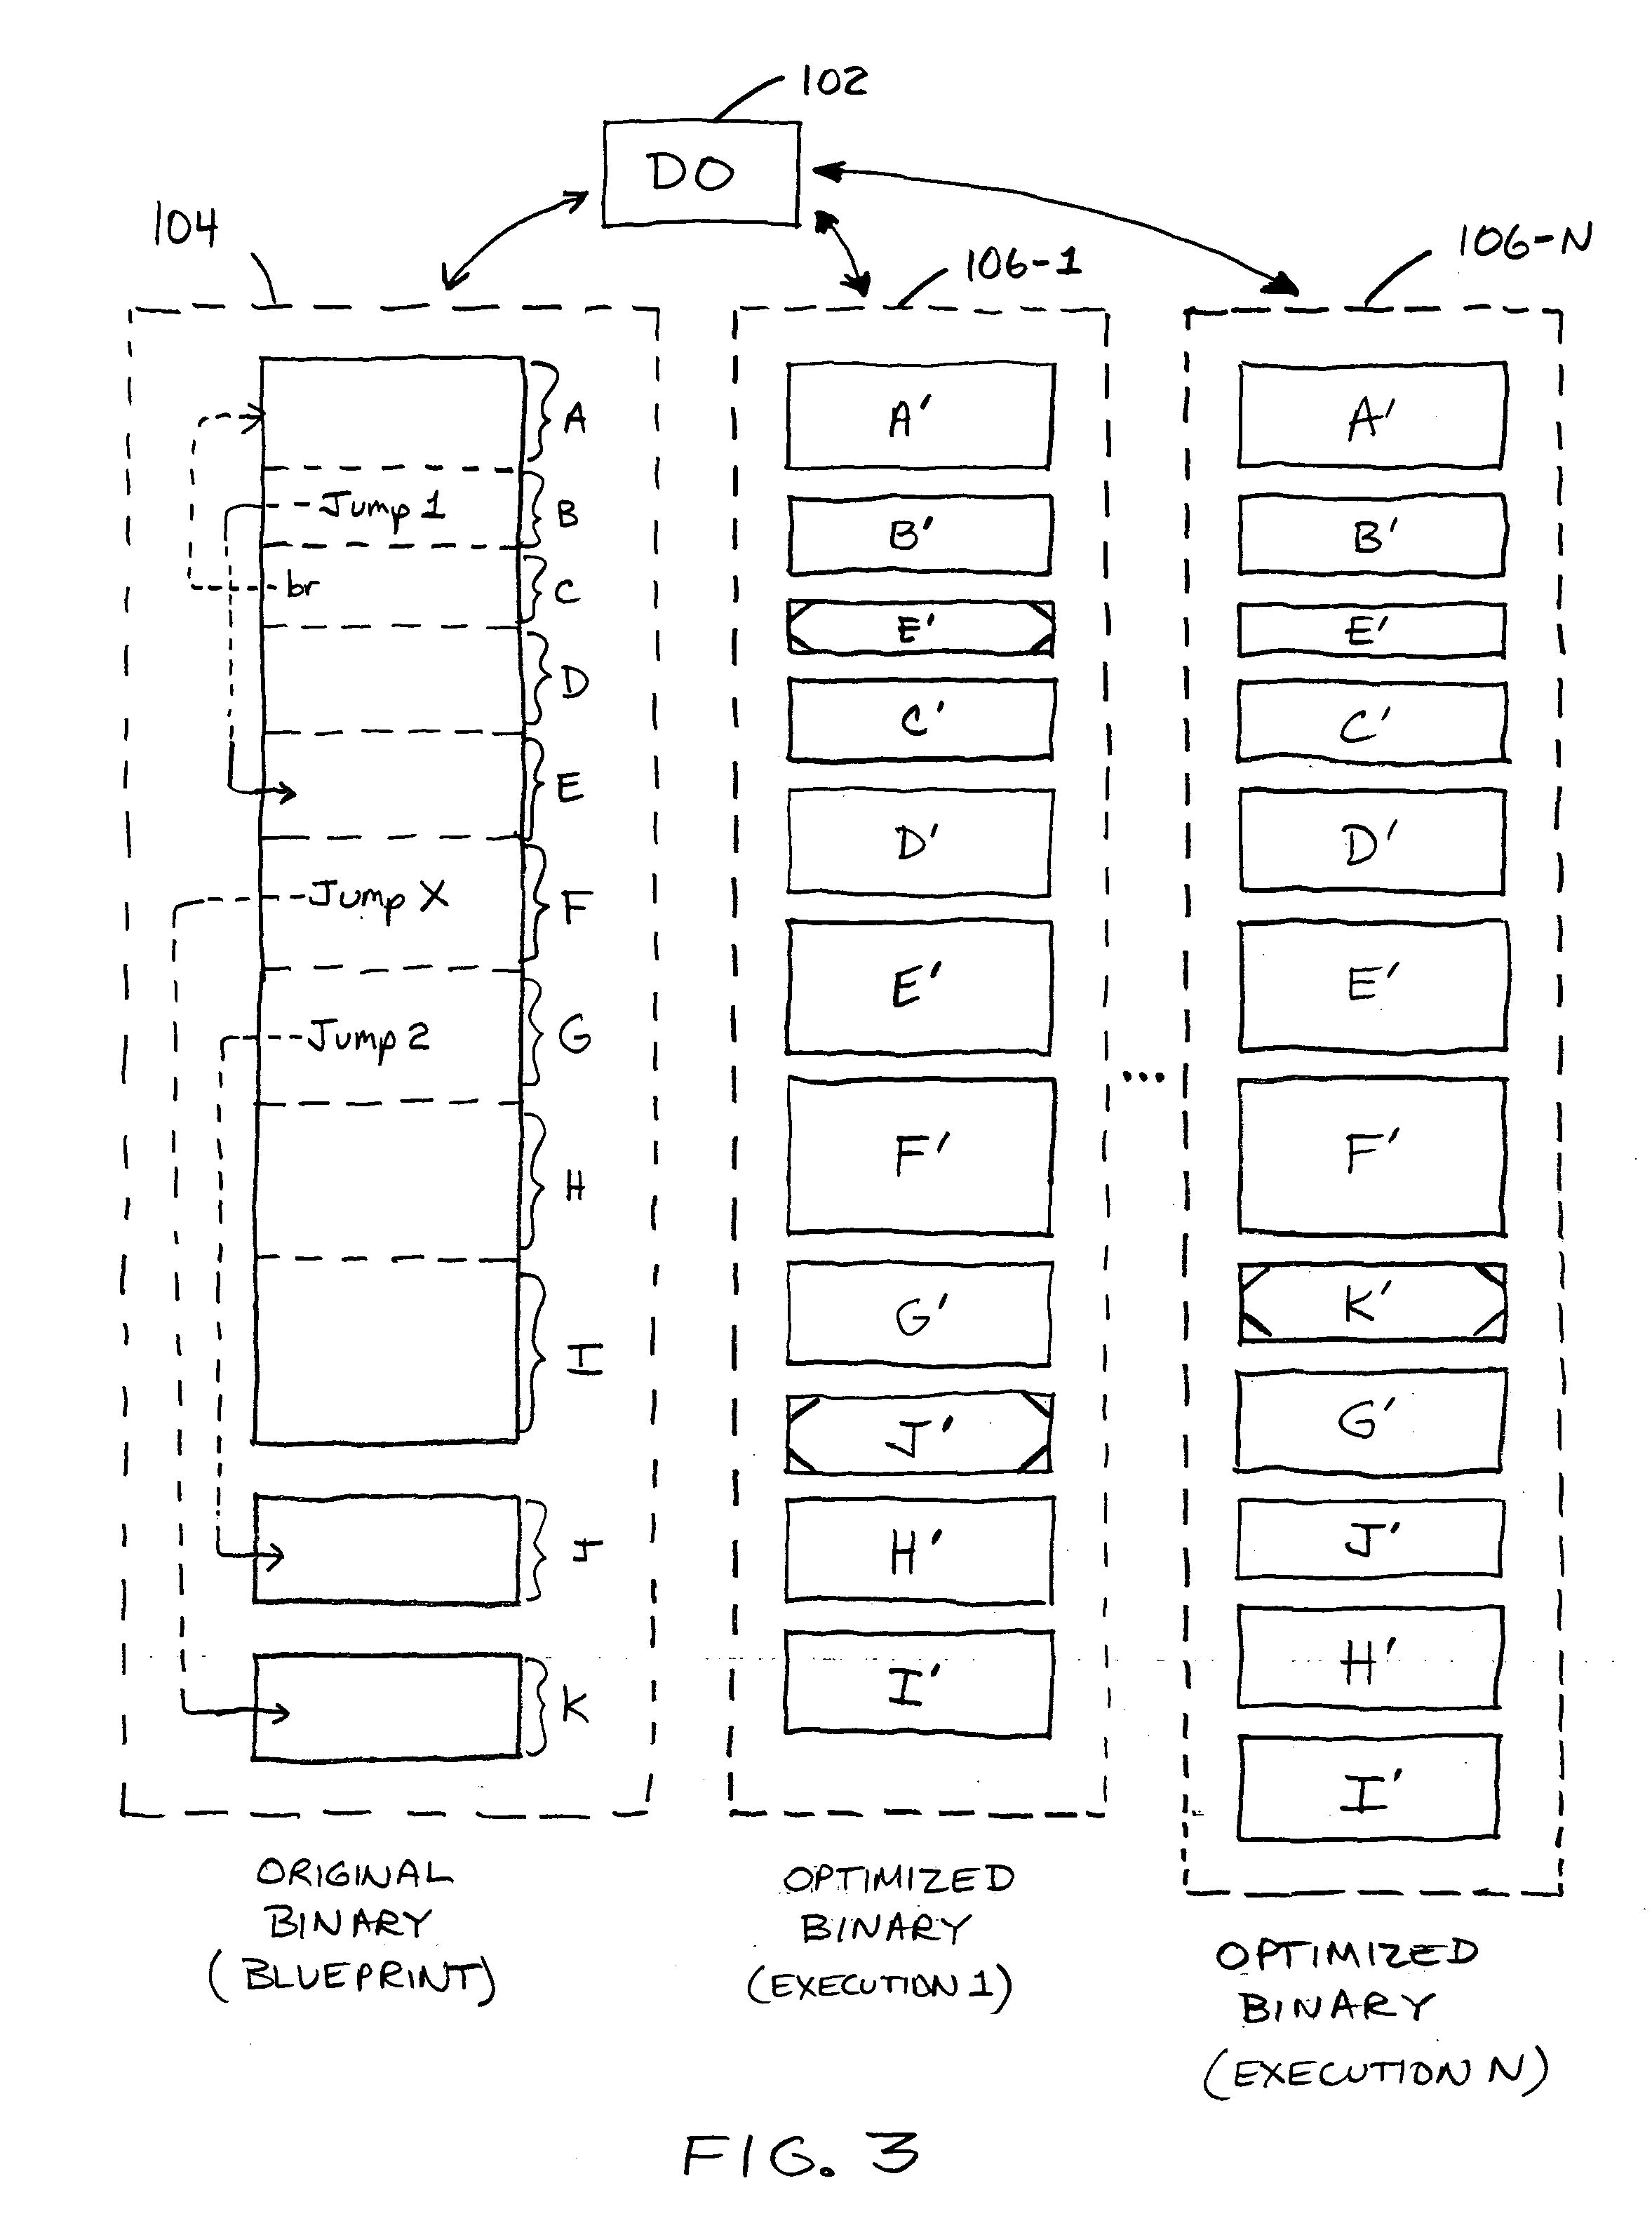 Method for dynamic recompilation of a program